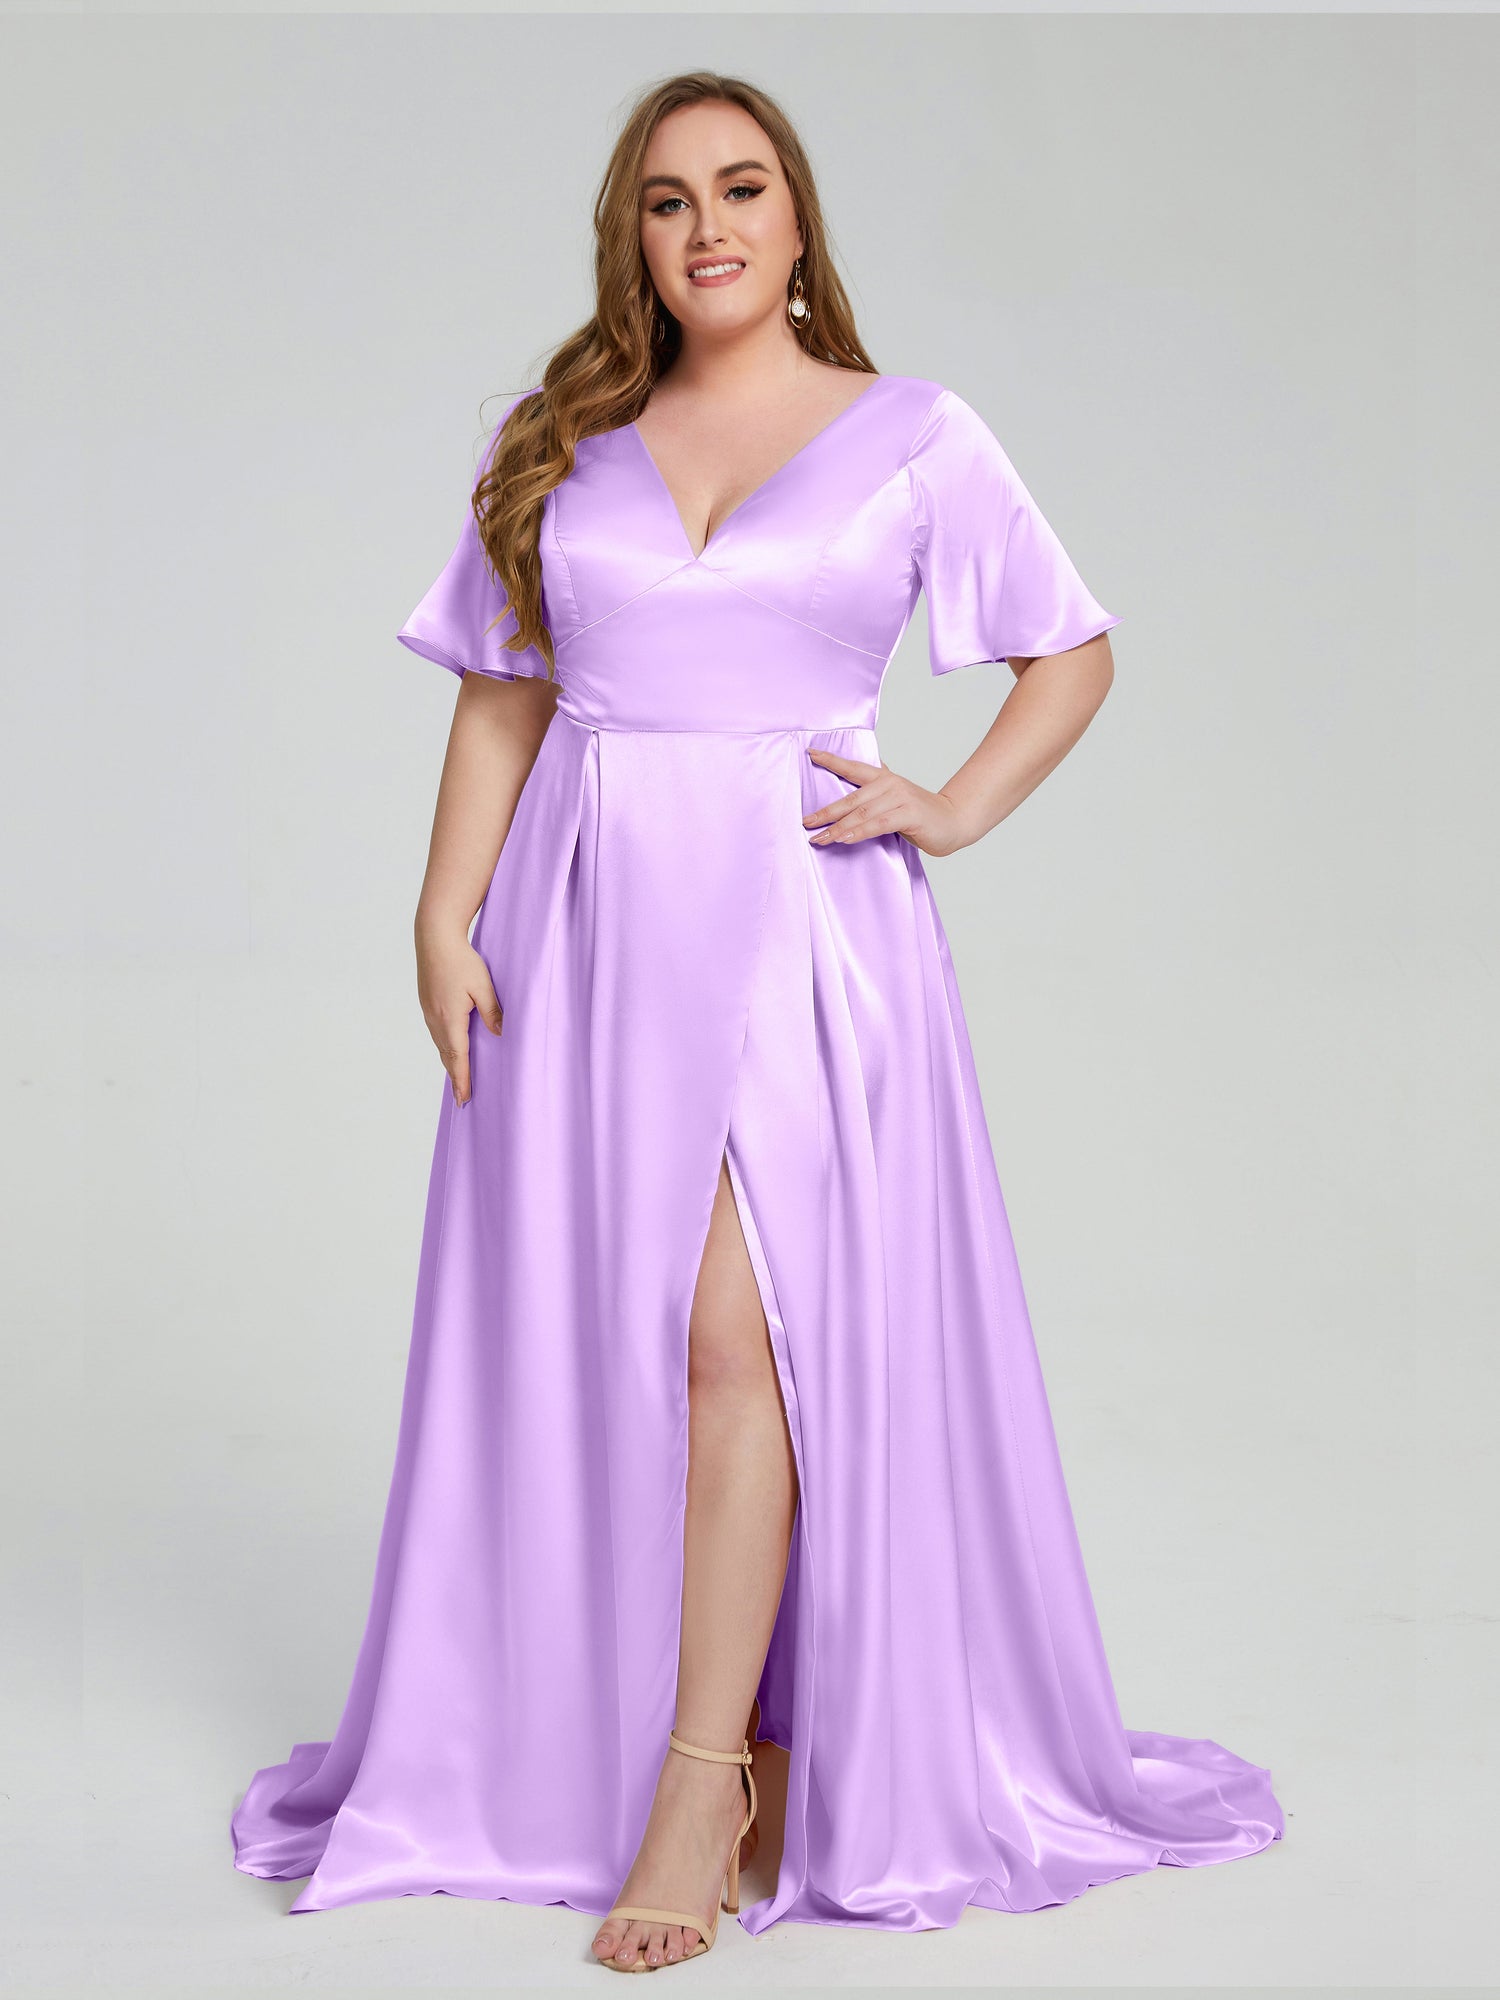 Fil Bygge videre på element This is the Dreamy Satin Bridesmaid Dress You Are Looking For